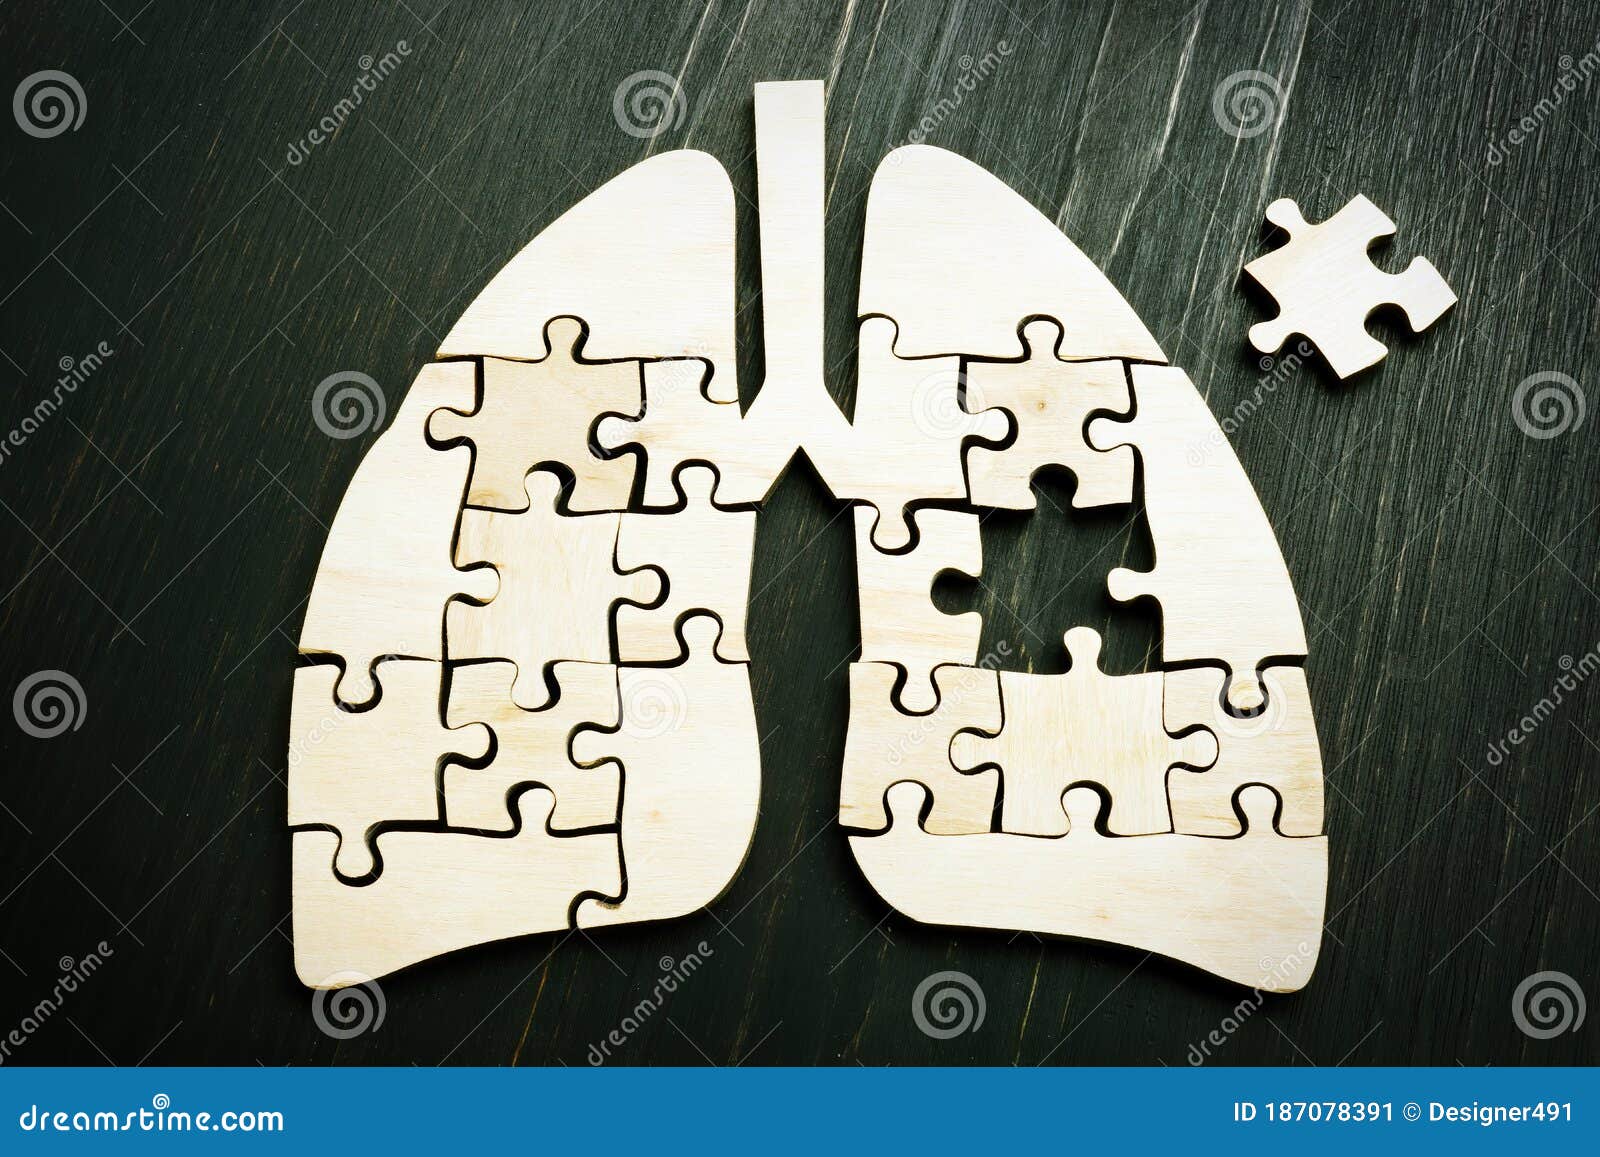 lung cancer or respiratory disease concept. wooden puzzle on the surface.